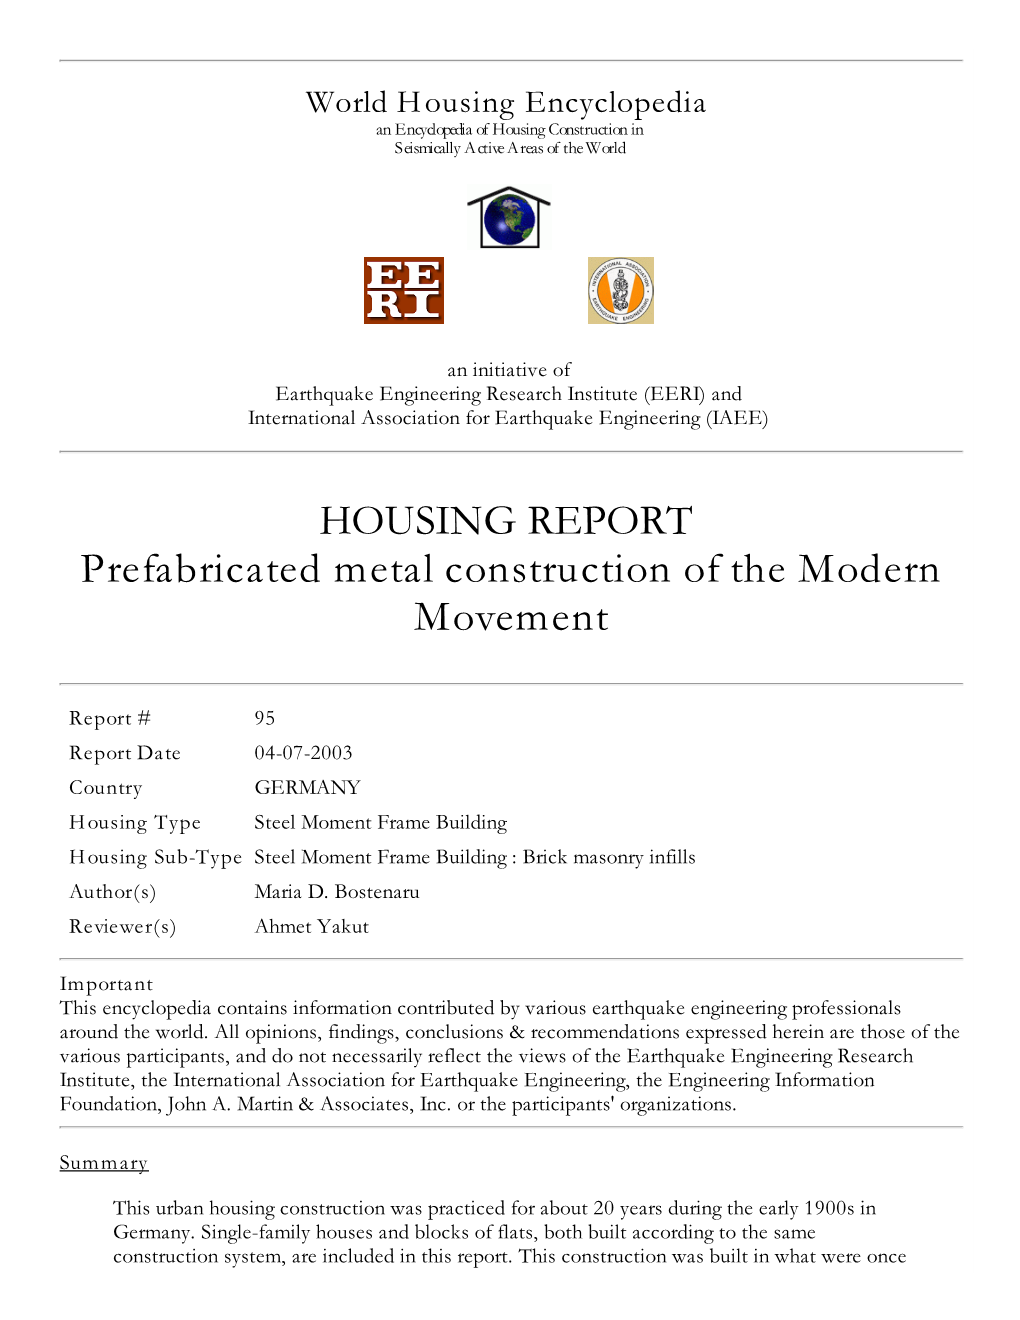 HOUSING REPORT Prefabricated Metal Construction of the Modern Movement